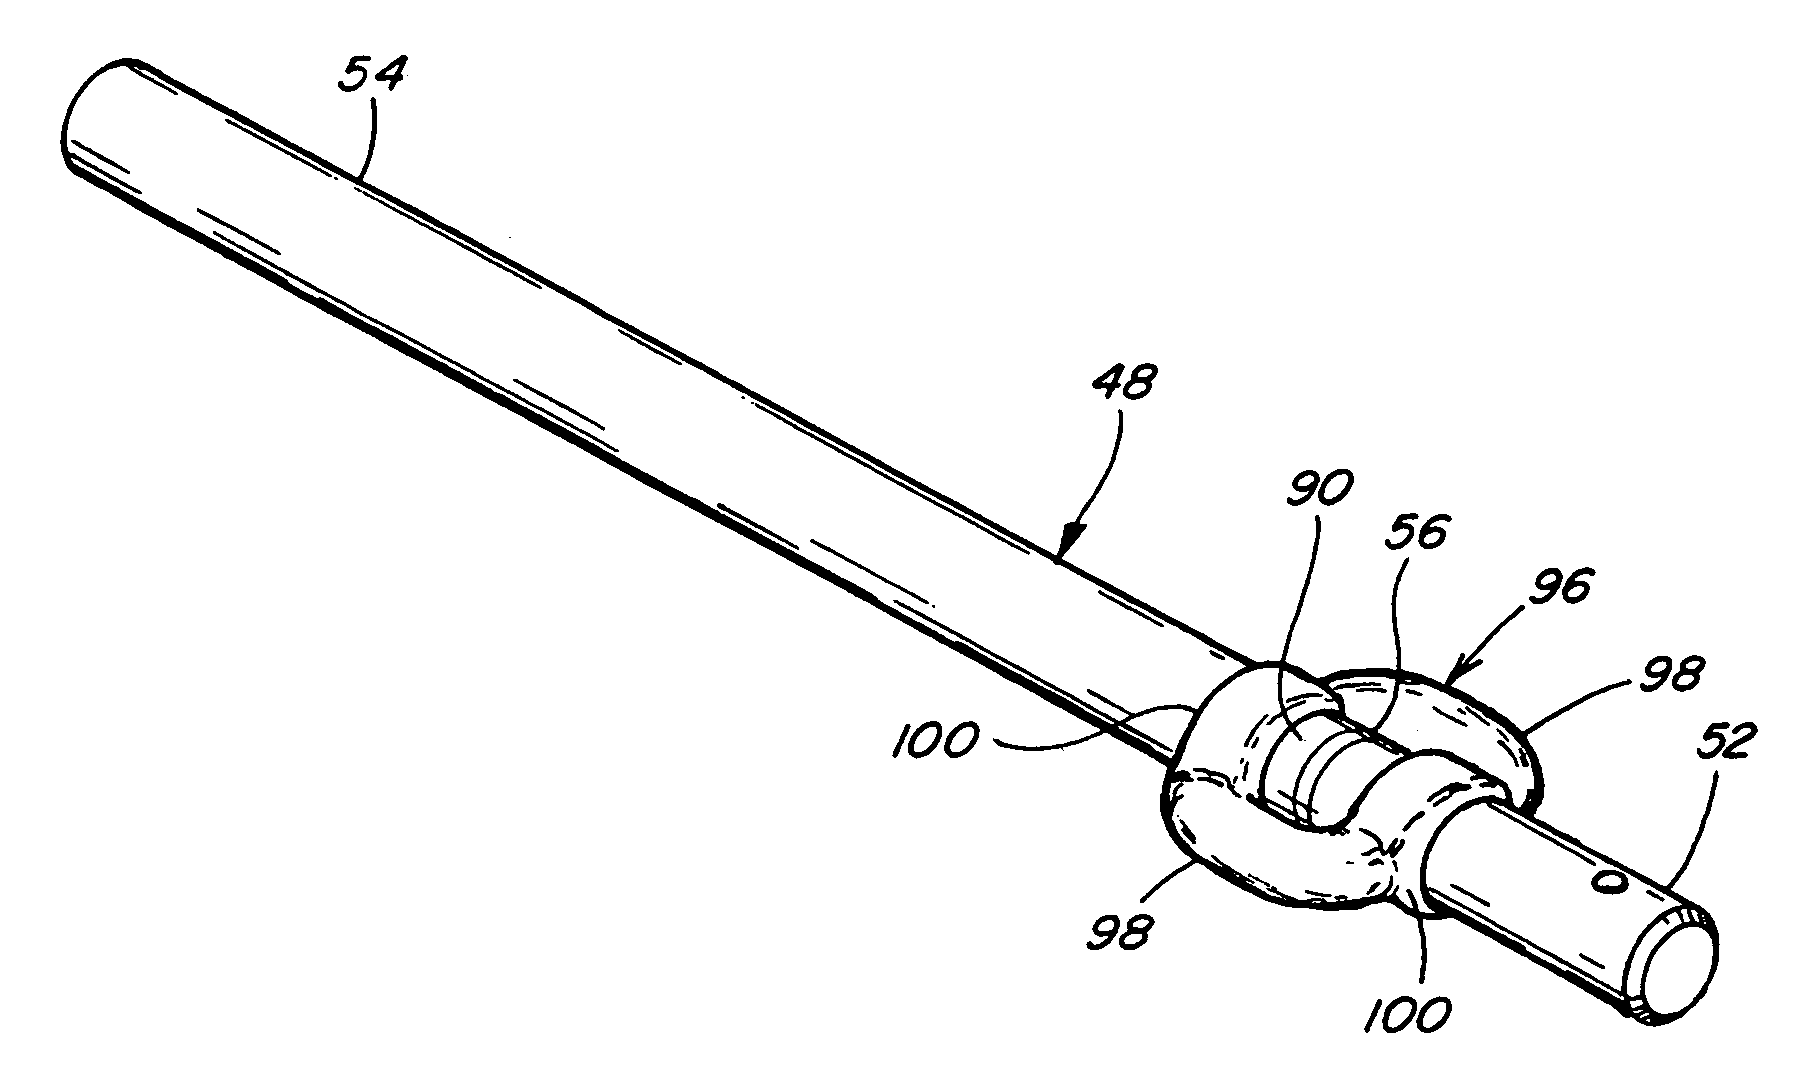 Auger finger with resilient elastomeric retainer retractor at breaking point